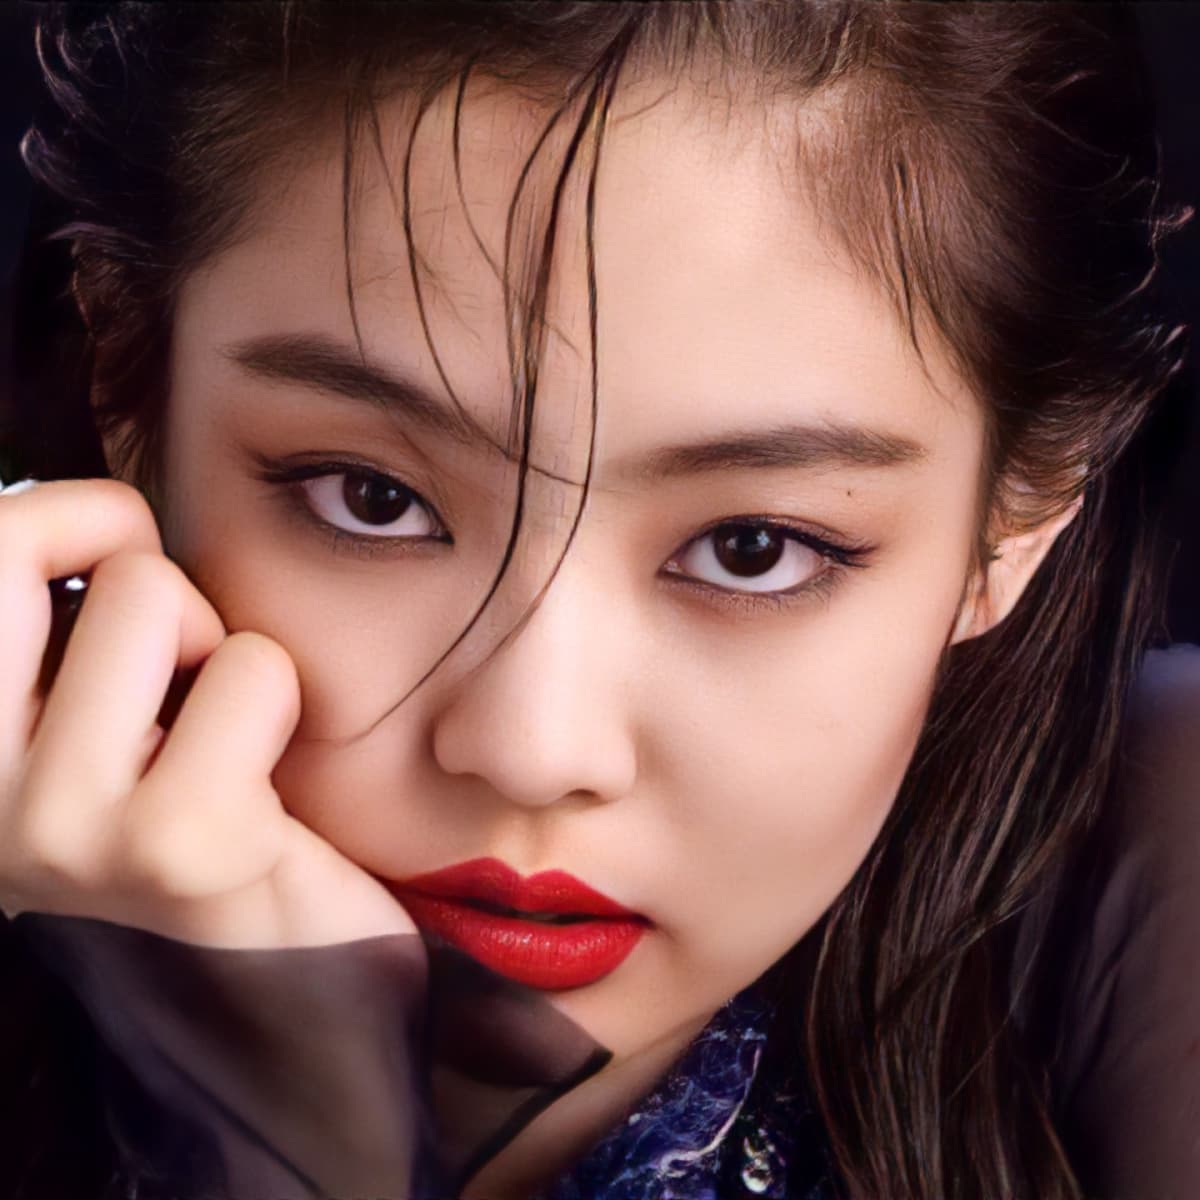 Things that reveal just what 'typa girl' BLACKPINK's Jennie Kim is